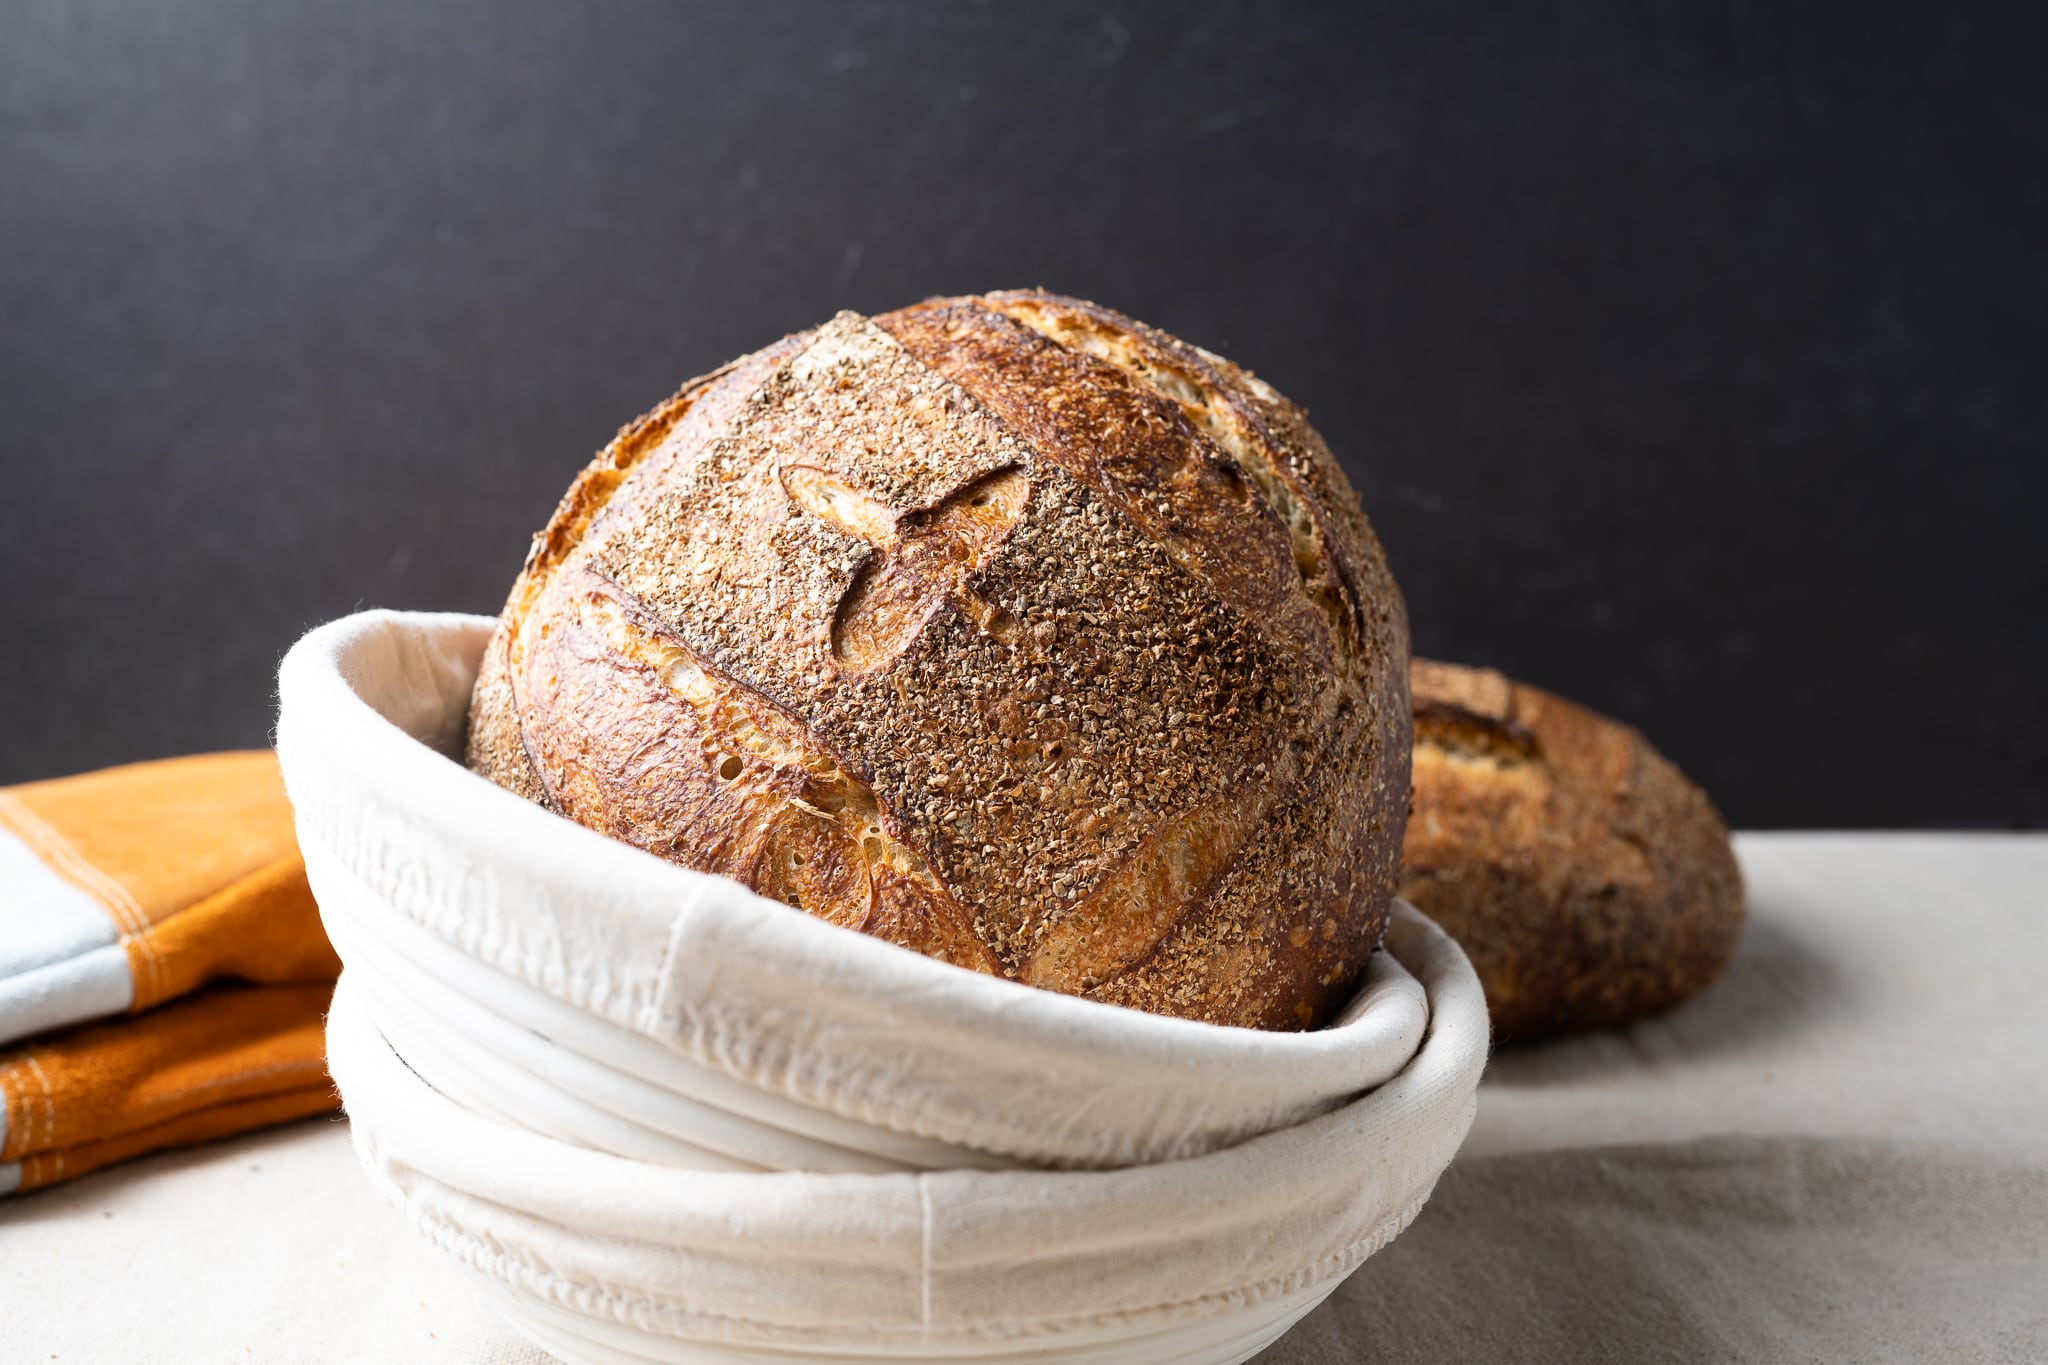 https://www.theperfectloaf.com/wp-content/uploads/2021/07/theperfectloaf-no-knead-sourdough-bread-1.jpg